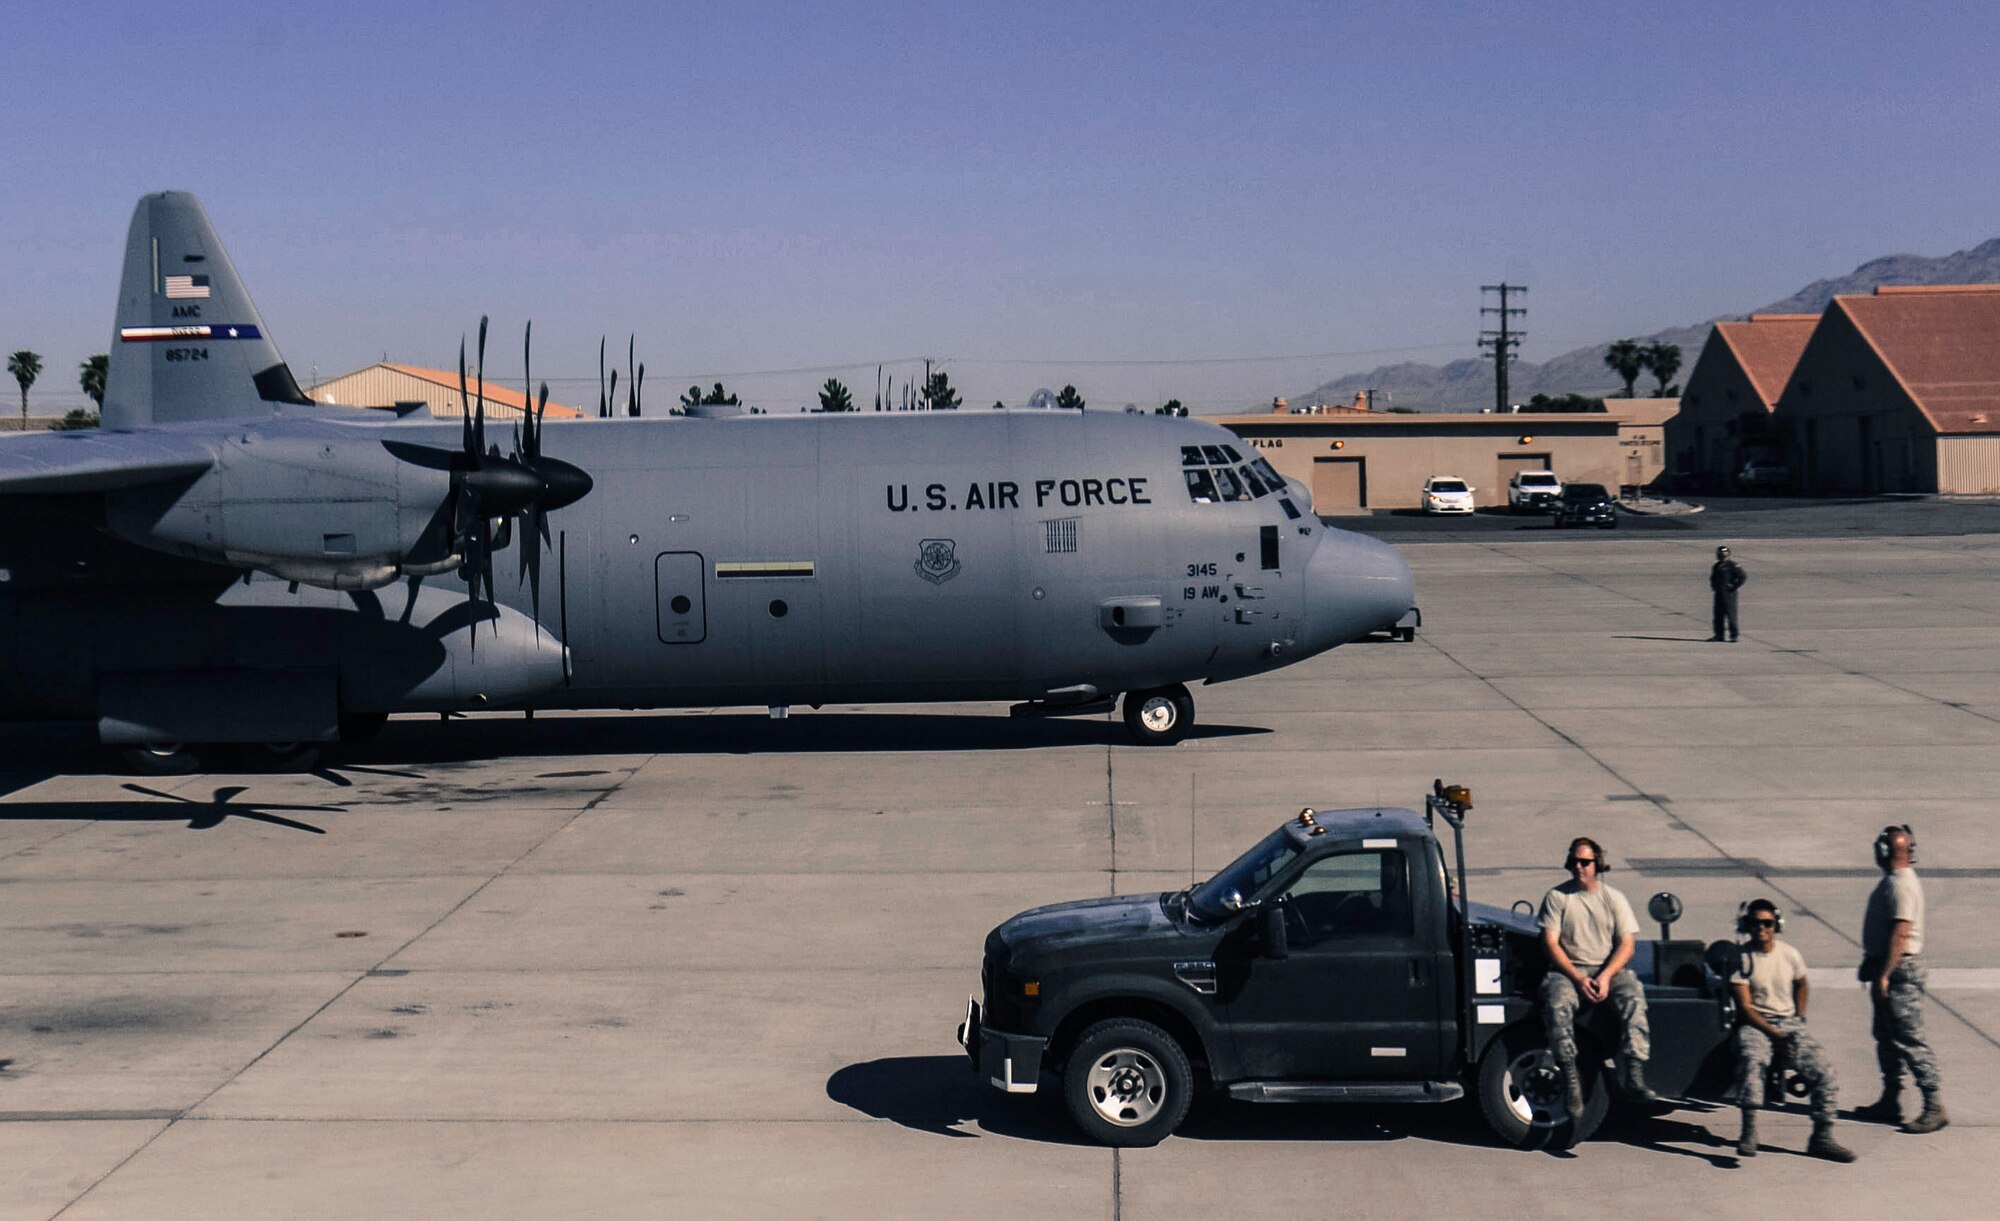 Aircraft maintainers watch as a C-130J Super Hercules prepares for takeoff before a Weapons School Integration mission at Nellis Air Force Base, Nev., June 2, 2017. Students who take the Weapons School course receive an average of 400 hours of graduate-level academics and participate in demanding combat training missions. (U.S. Air Force photo by Senior Airman Kevin Tanenbaum/Released) 